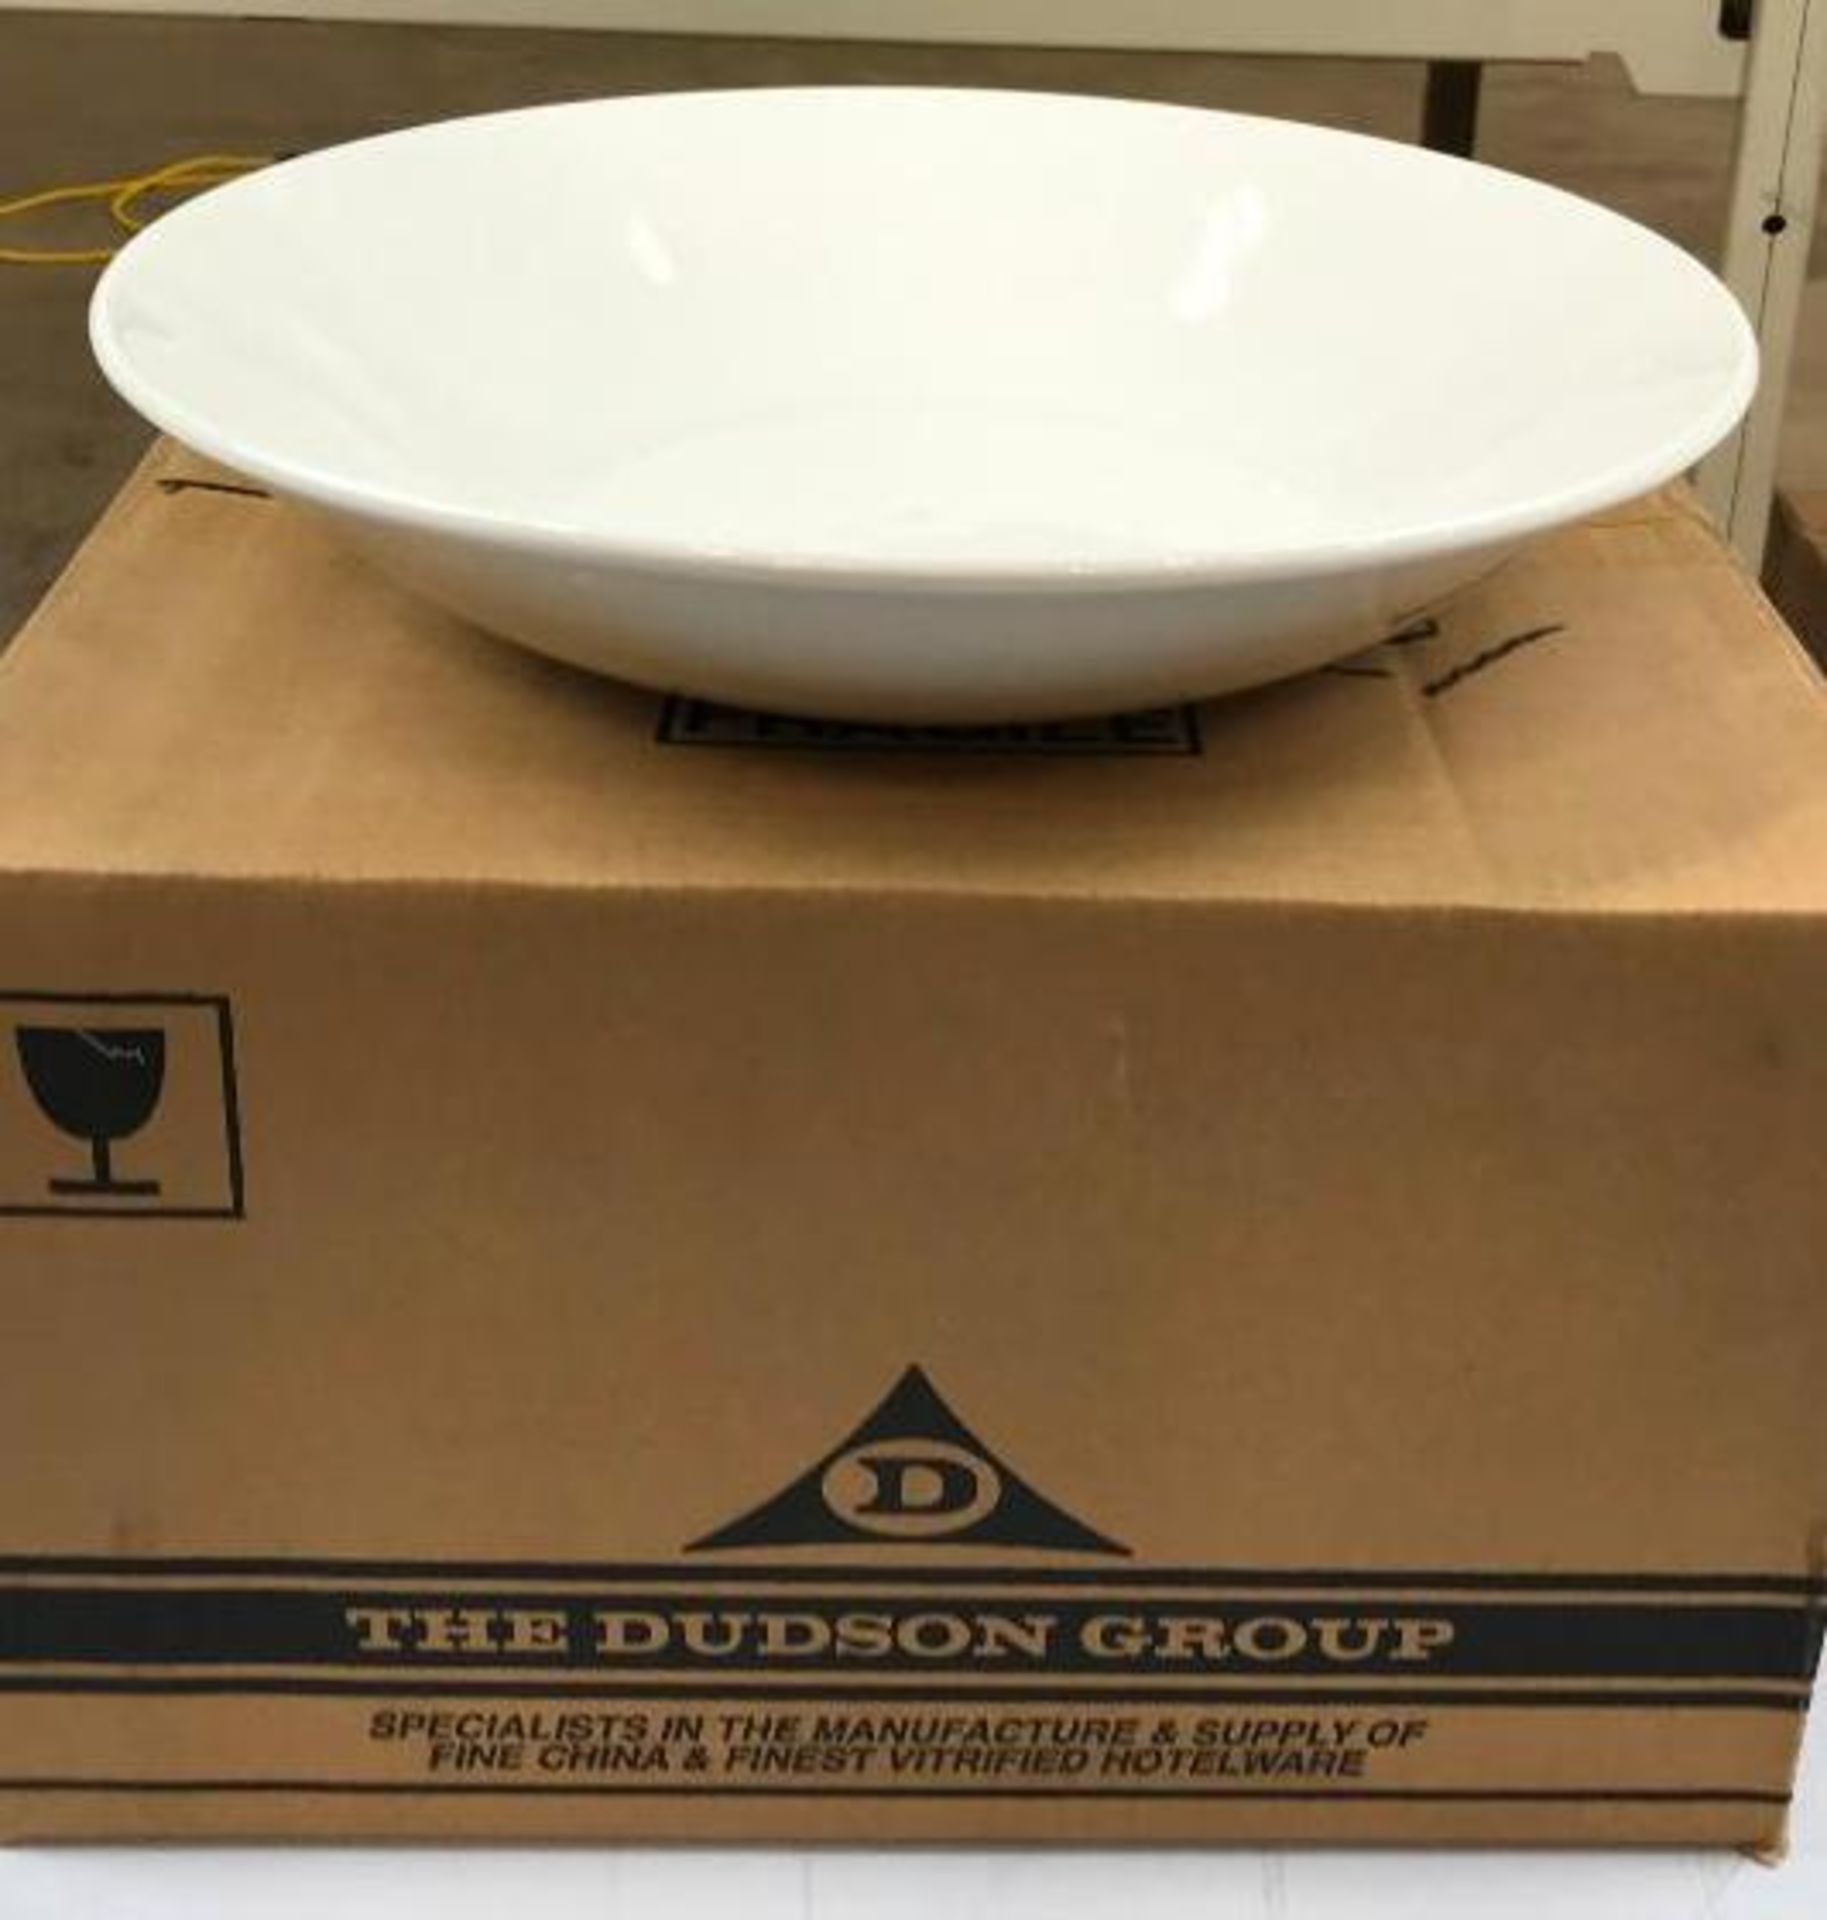 DUDSON CLASSIC CHEF'S BOWL 12.5" - 3/CASE, MADE IN ENGLAND - Image 4 of 5